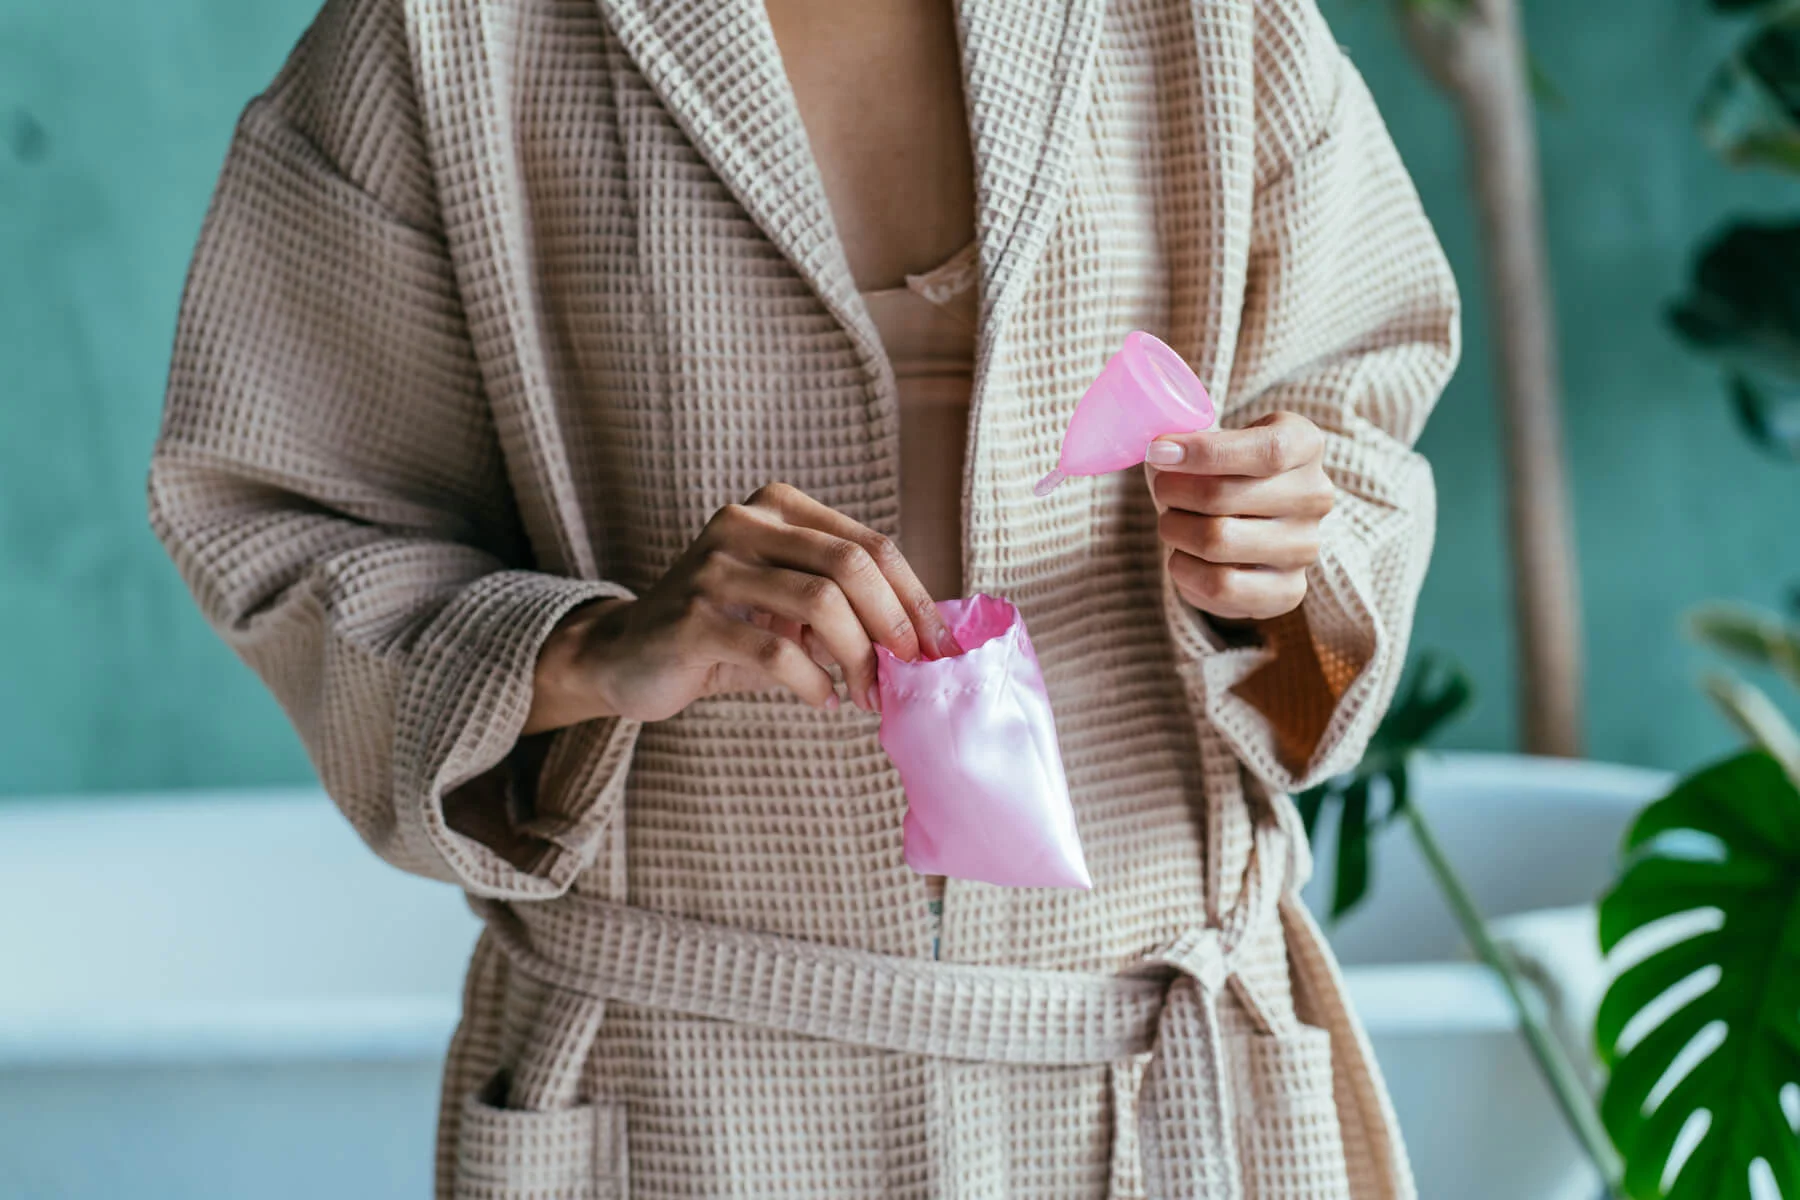 sexual health belgium: a woman holding a menstrual cup